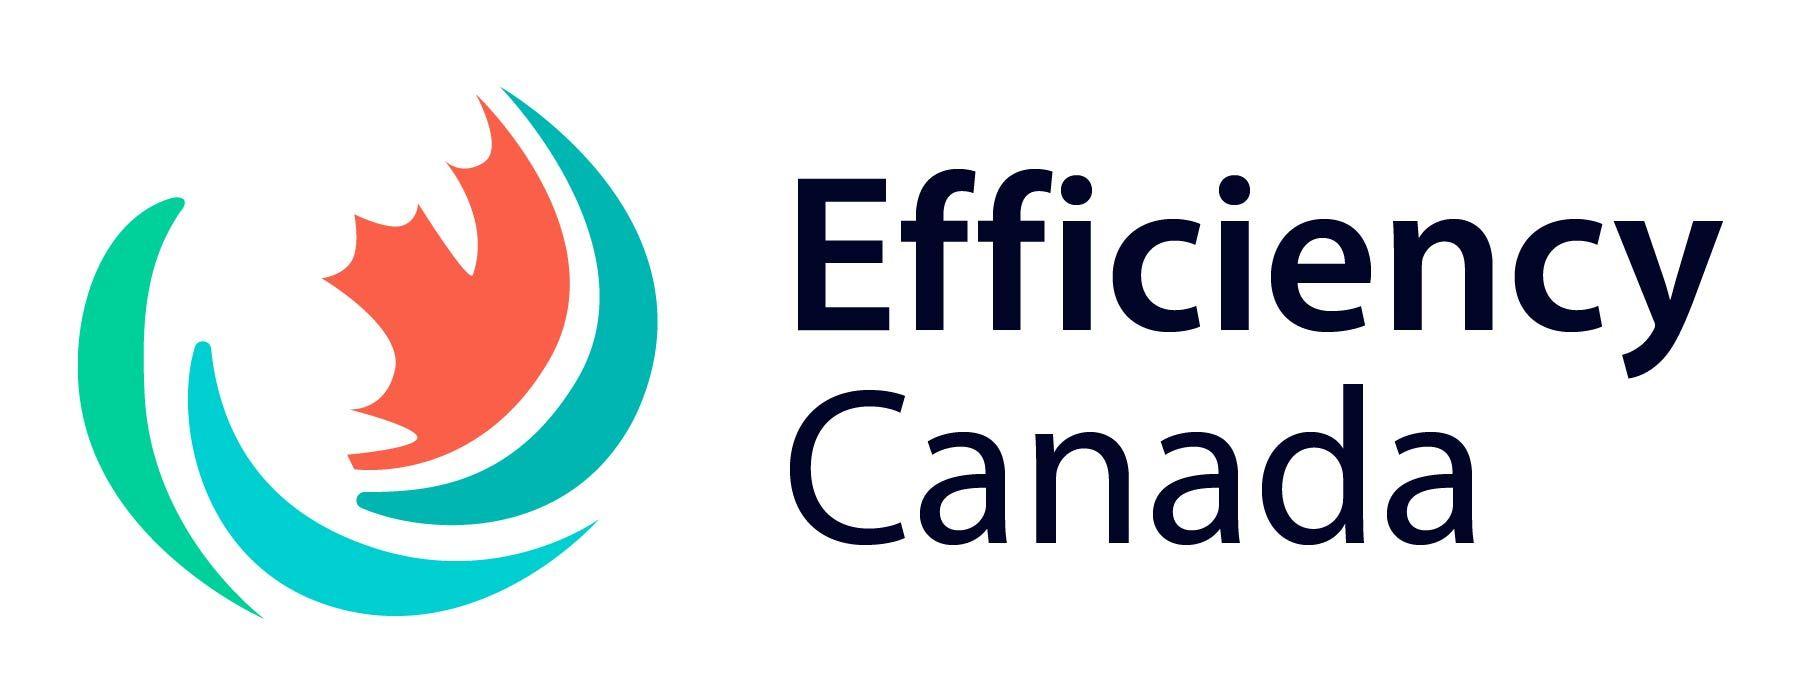 Efficiency Logo - Efficiency Canada - The National Voice for an Energy Efficiency Economy